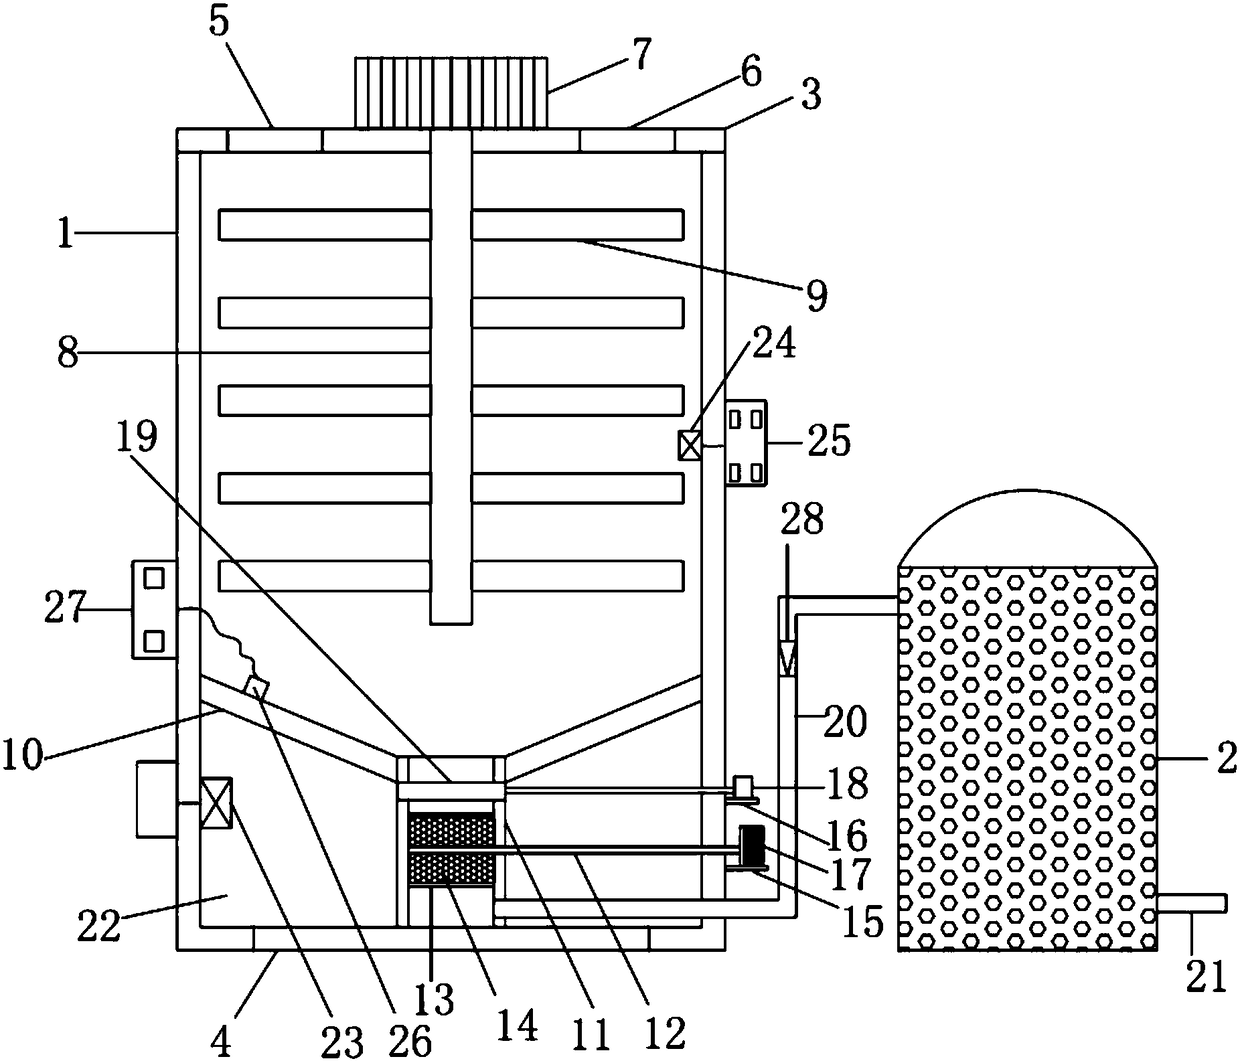 Wastewater treatment device for treating sludge containing mercury